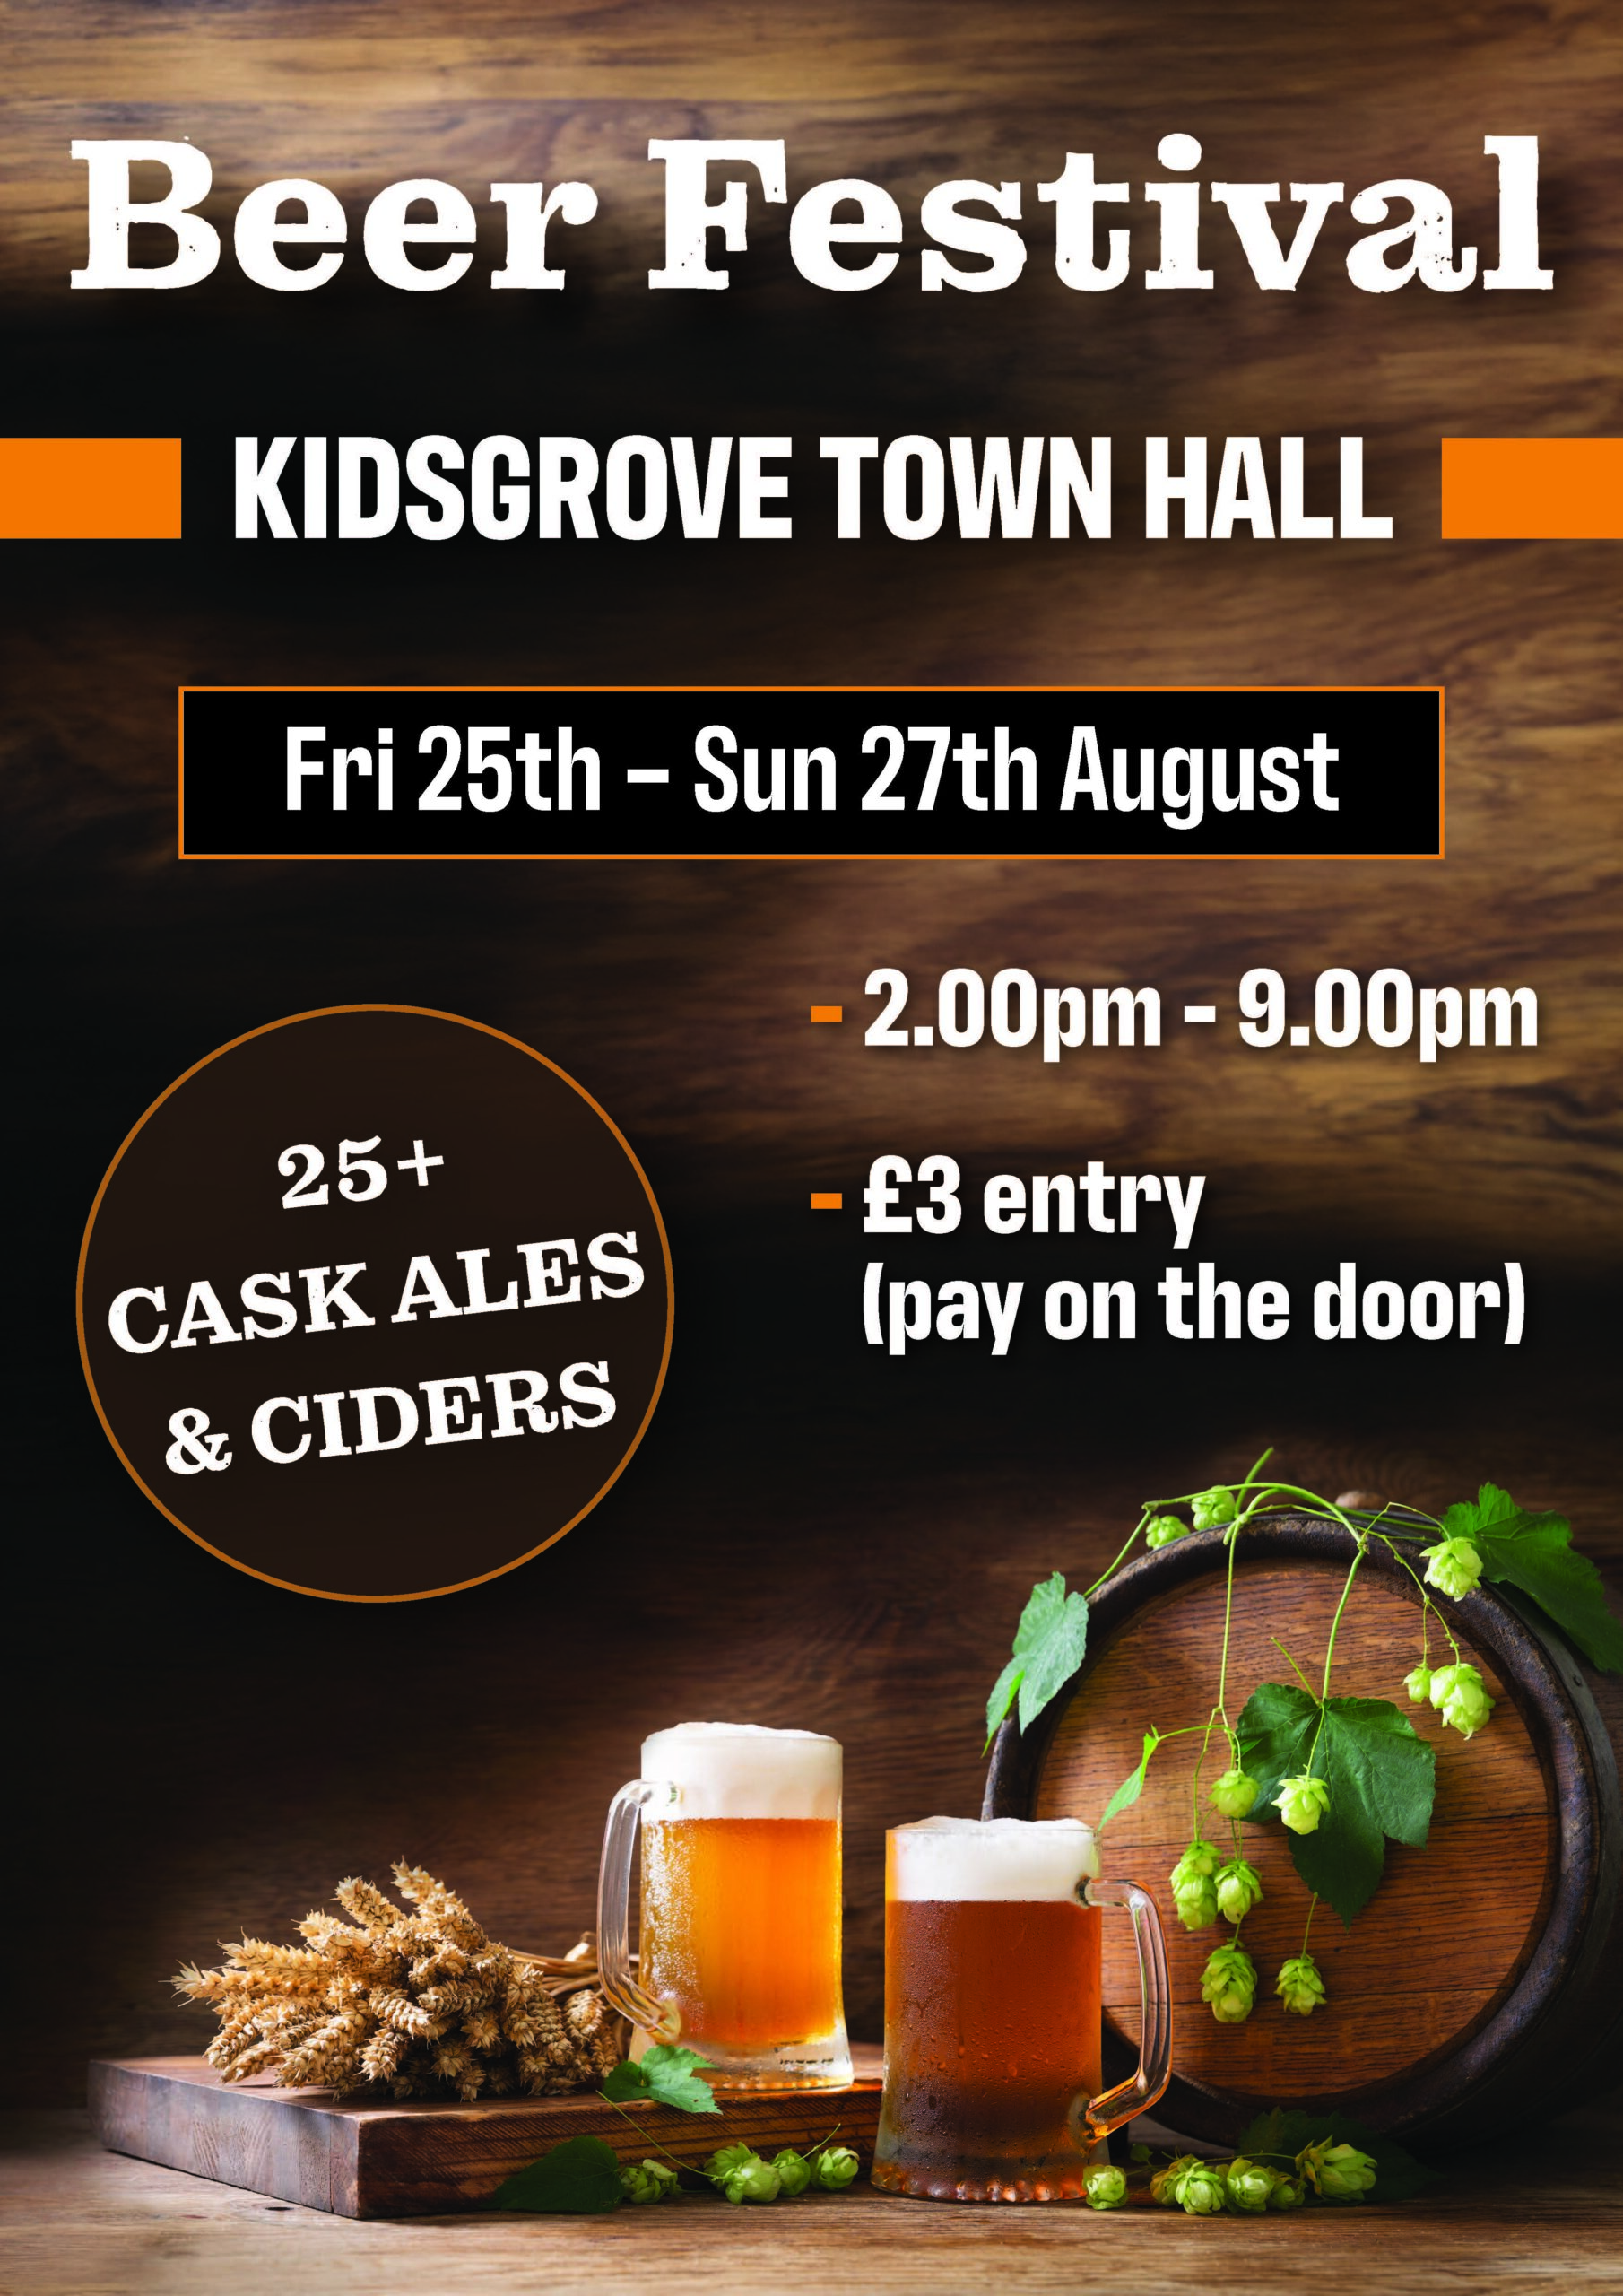 Beer Festival at Kidsgrove Town Hall – August Bank Holiday Weekend